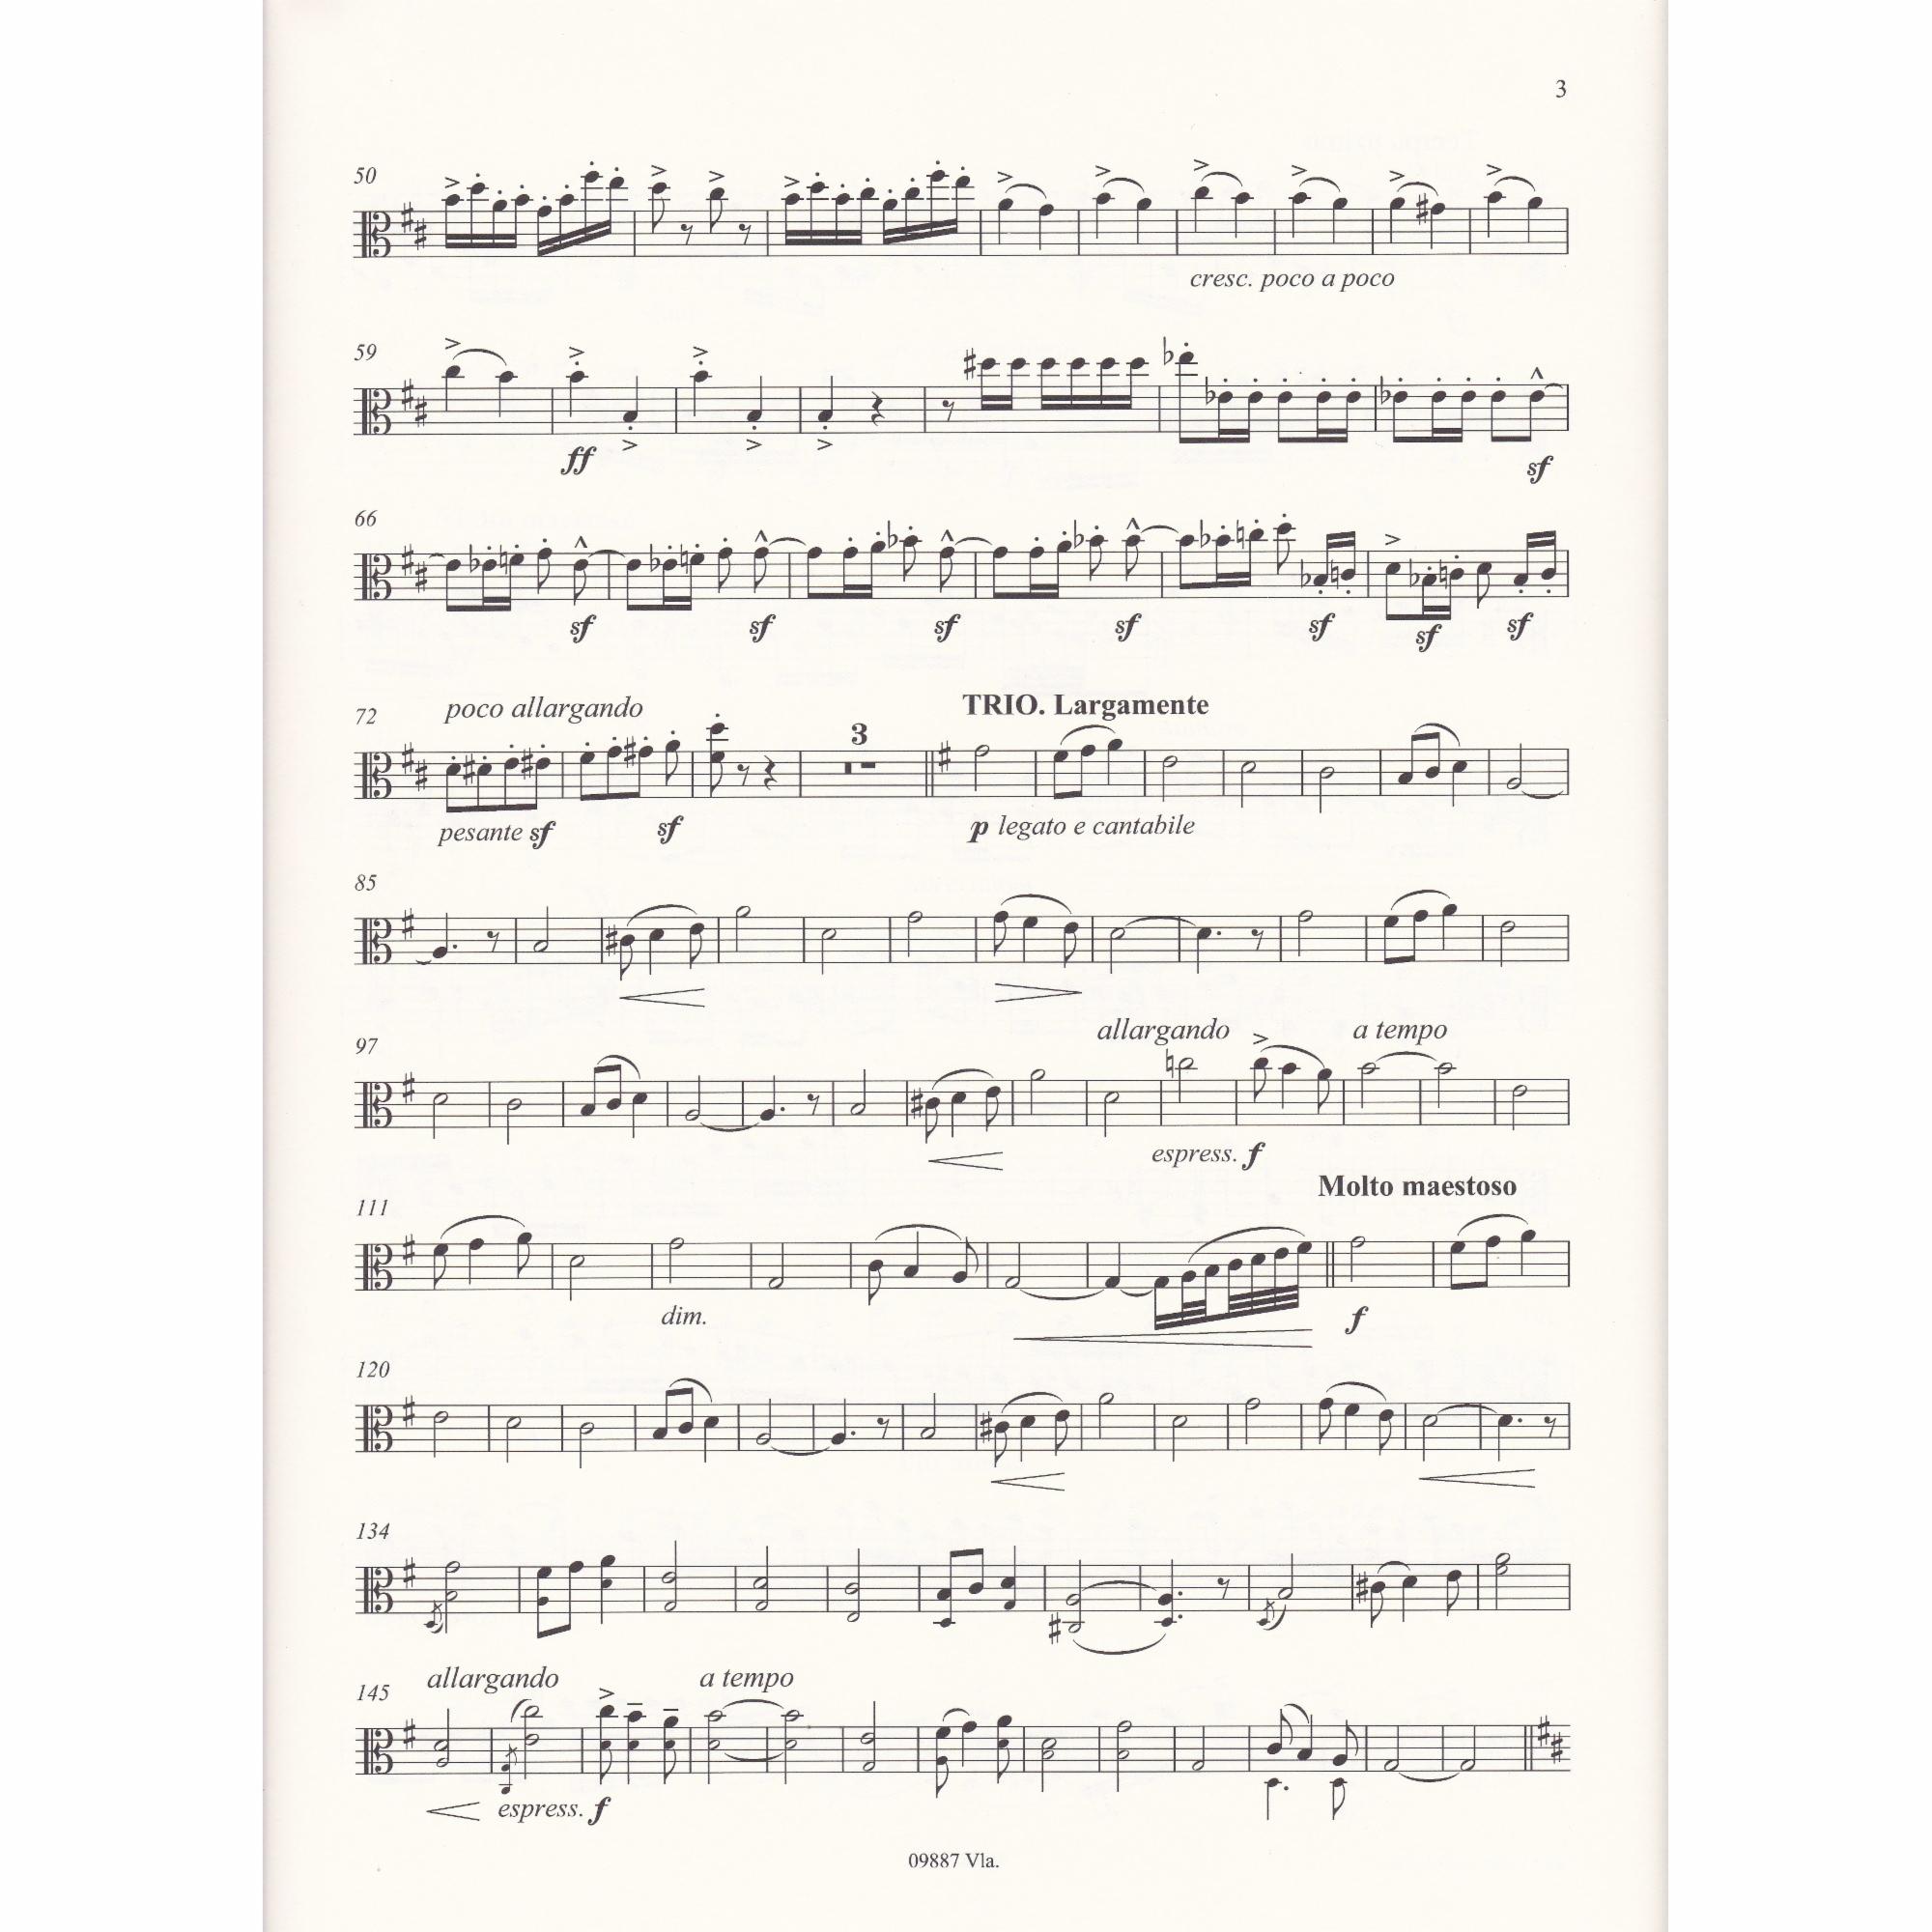 Pomp and Circumstance for Viola and Piano, Op. 39, No. 1